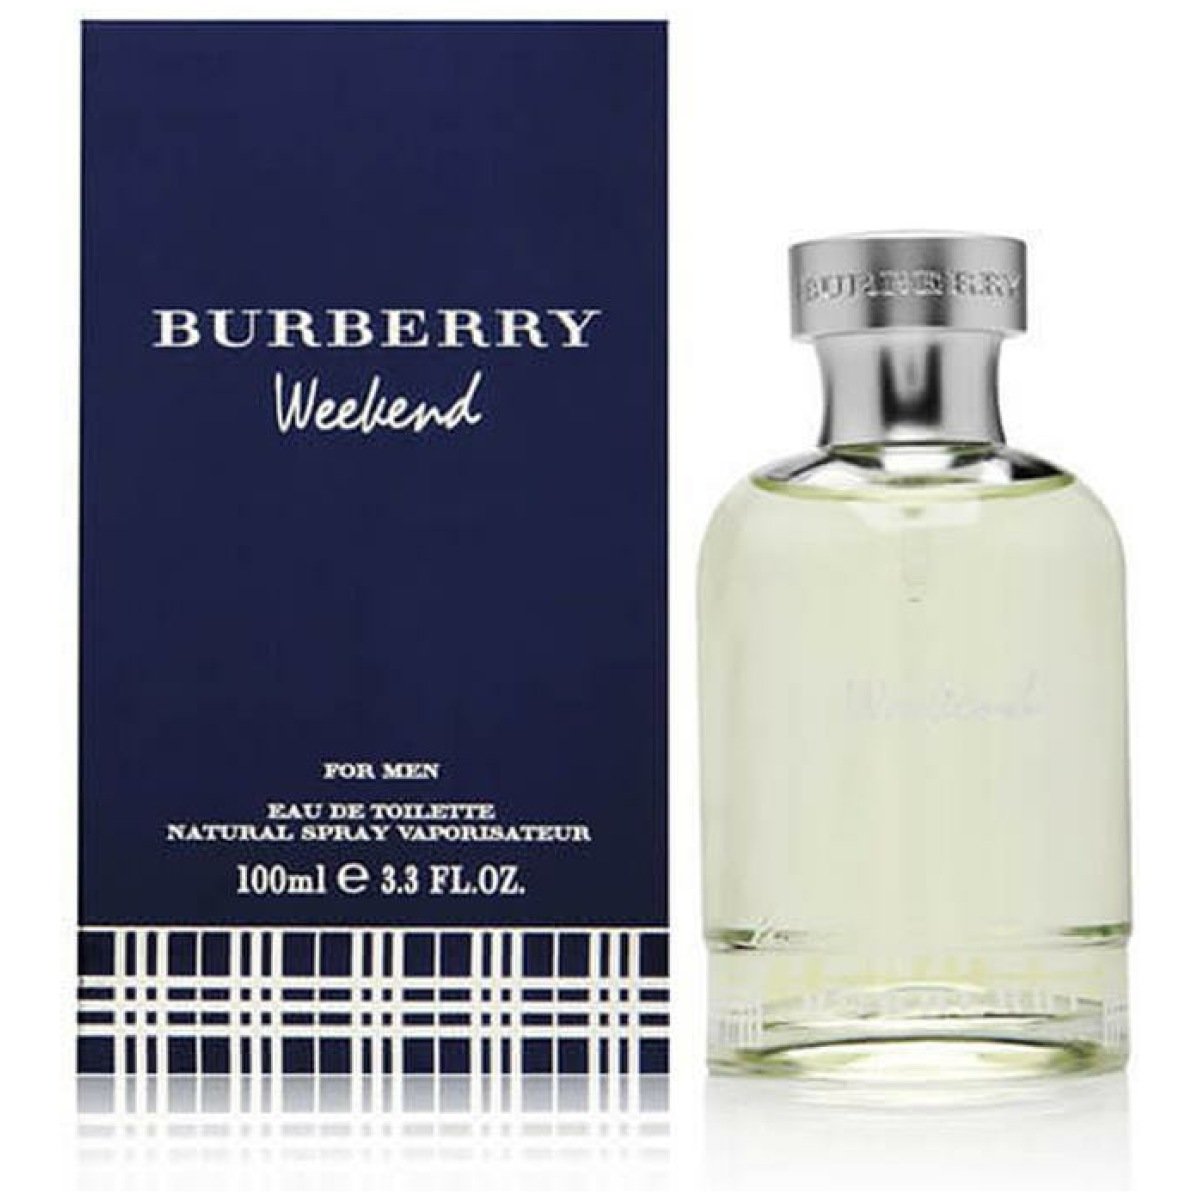 Burberry Weekend EDT Perfume For Men 100ml